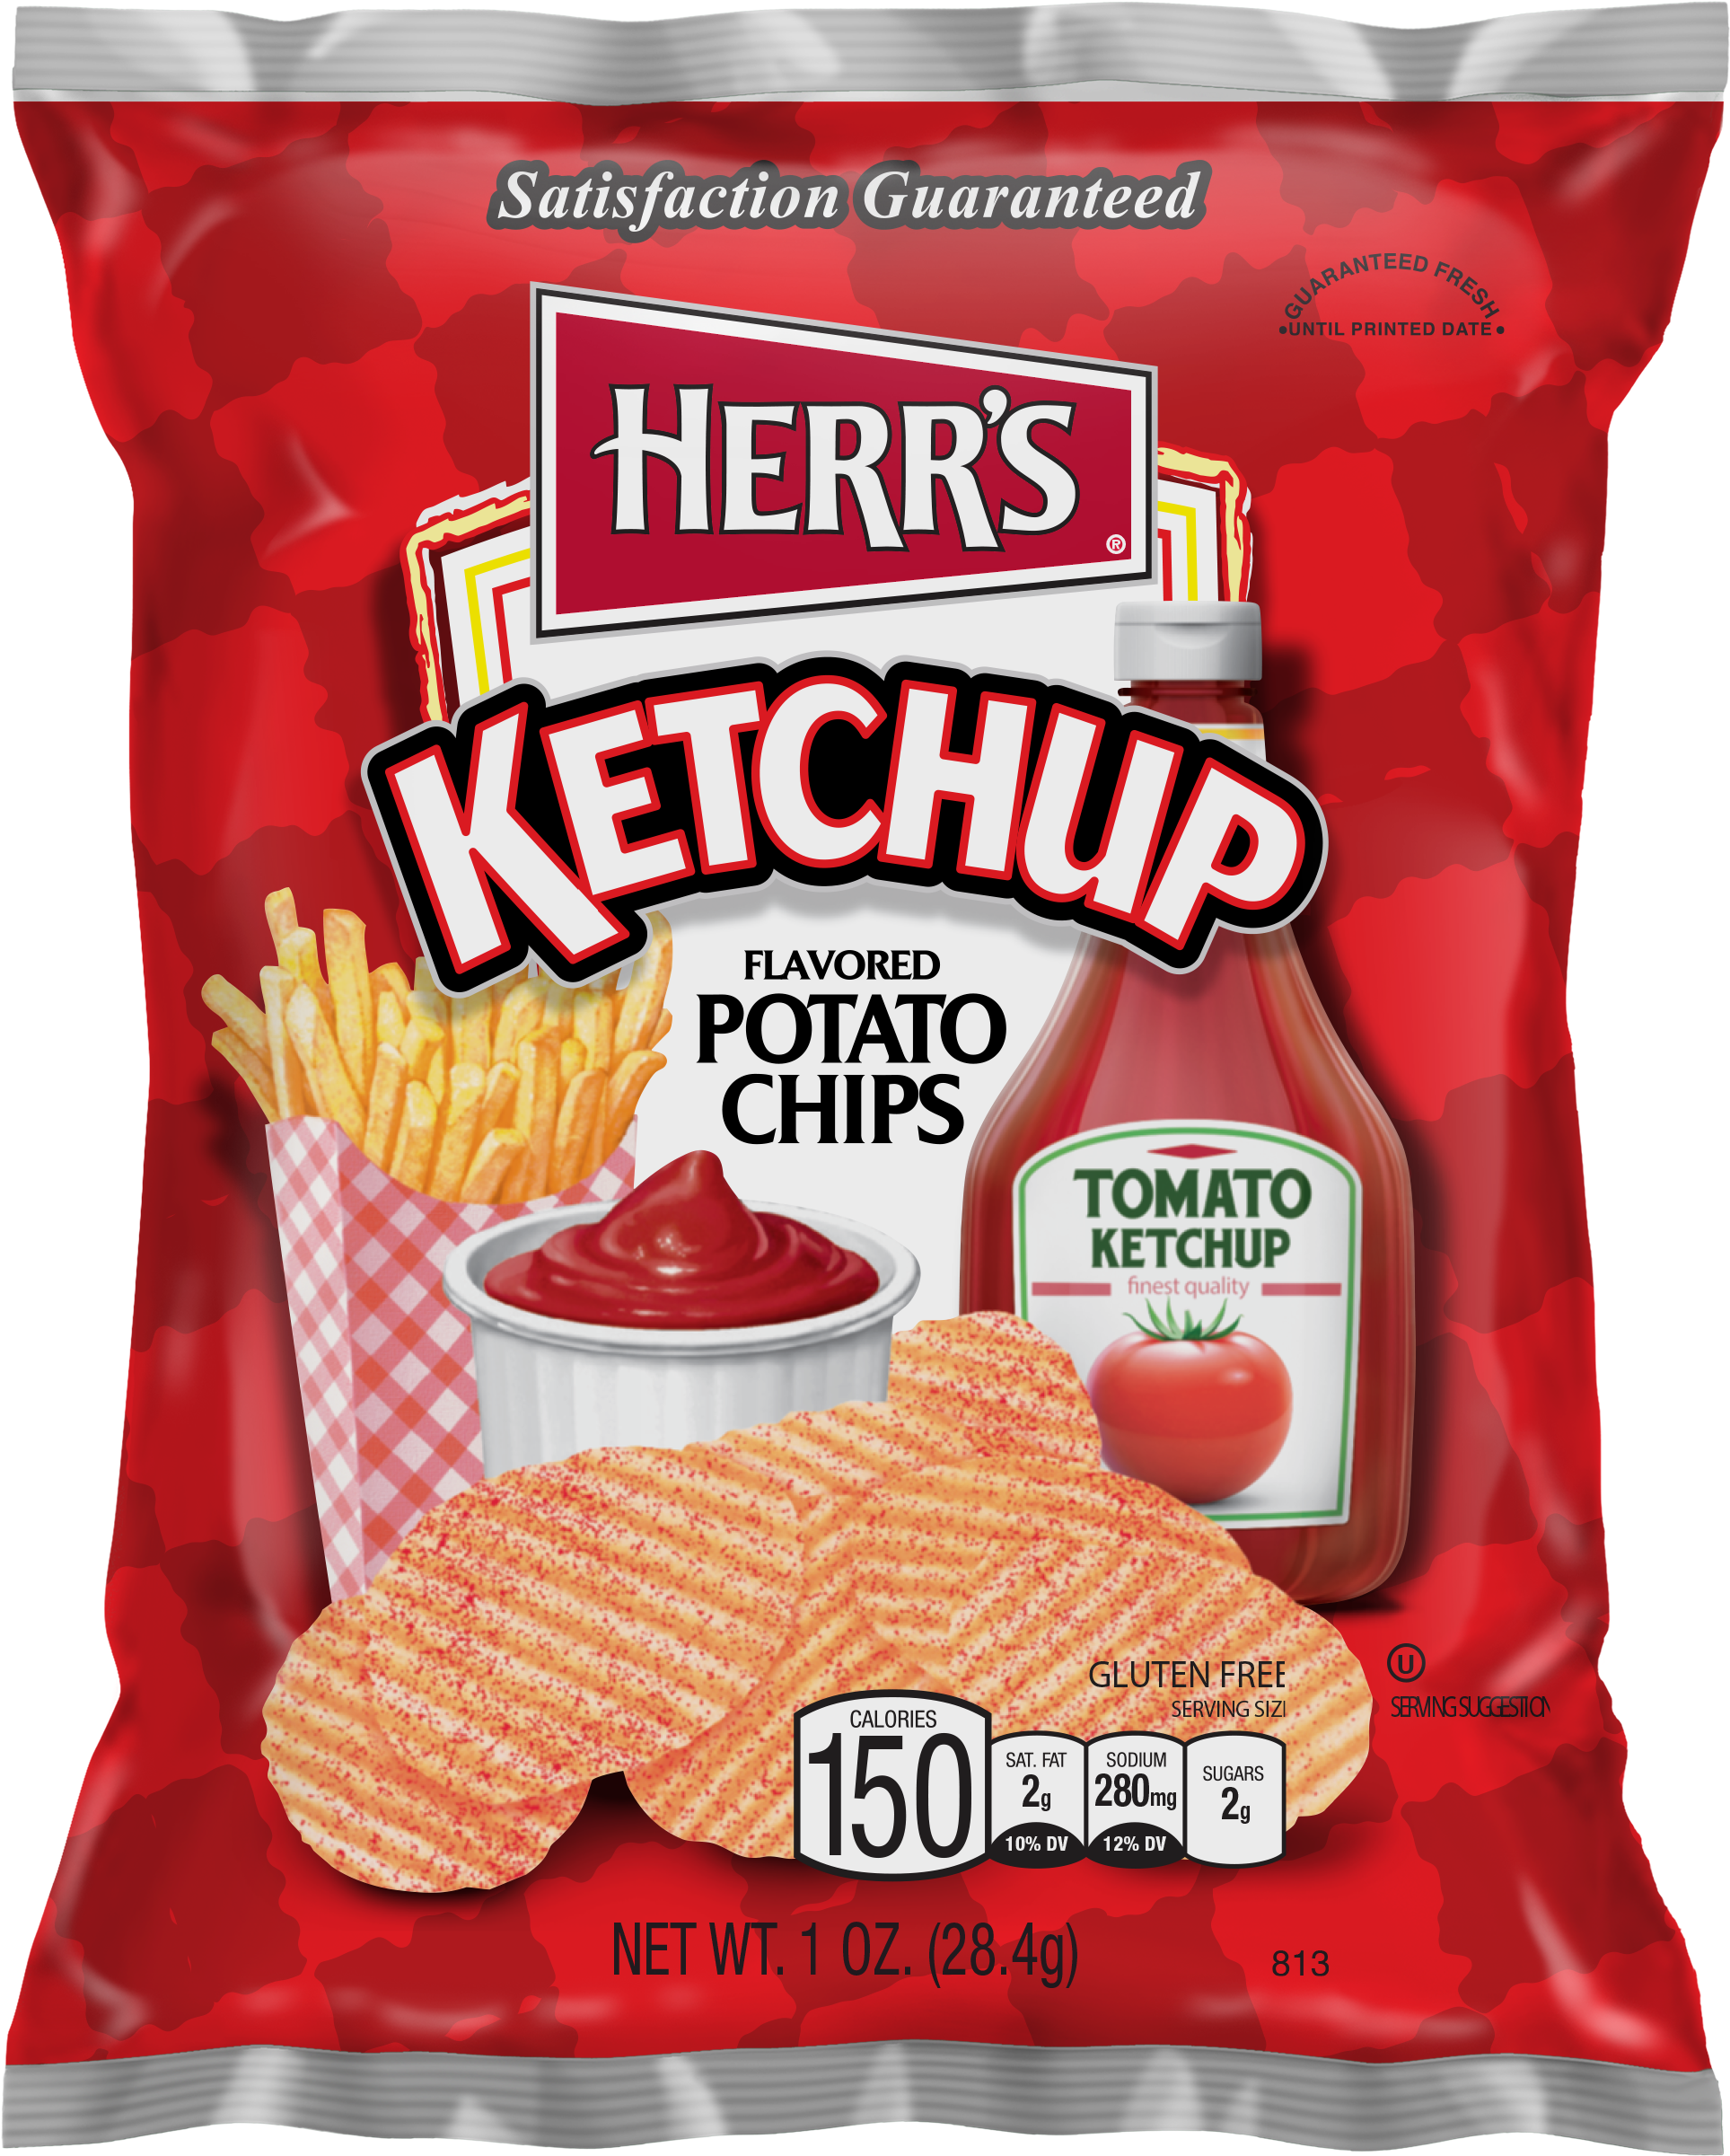 Herrs Ketchup Flavored Potato Chips Package PNG image